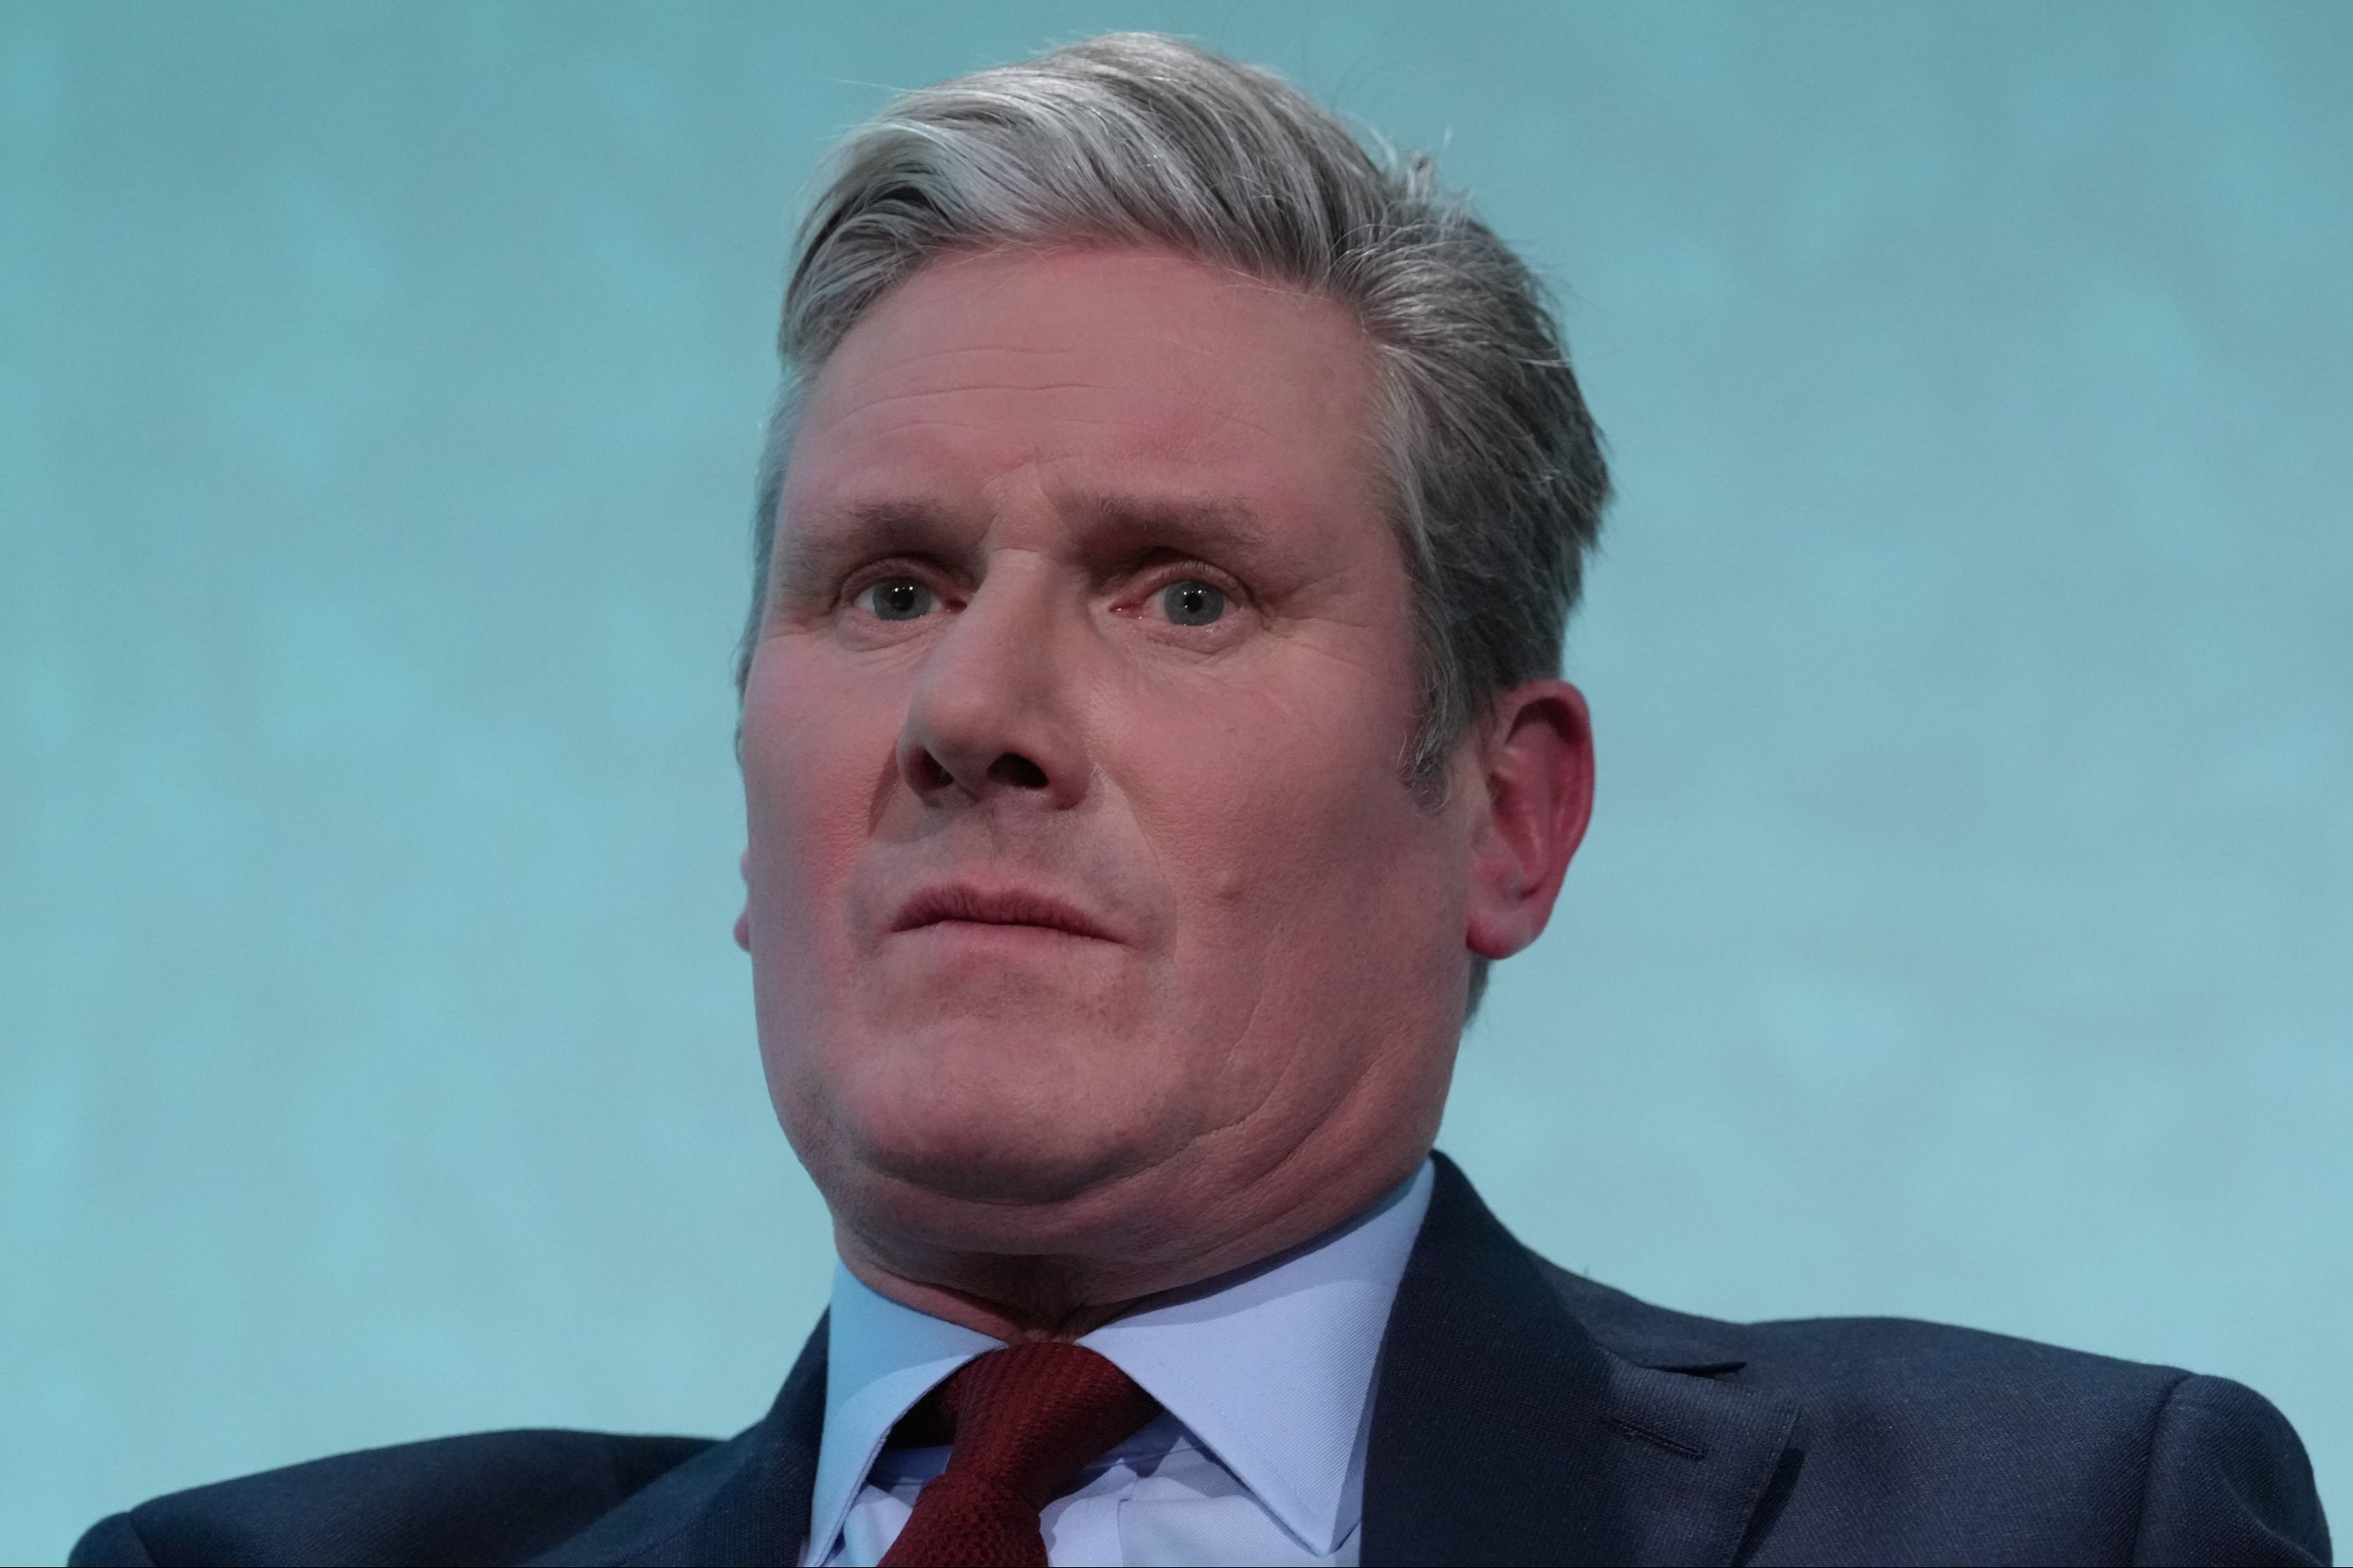 Sir Keir Starmer Labour leader has said he is an advocate of changes to the law